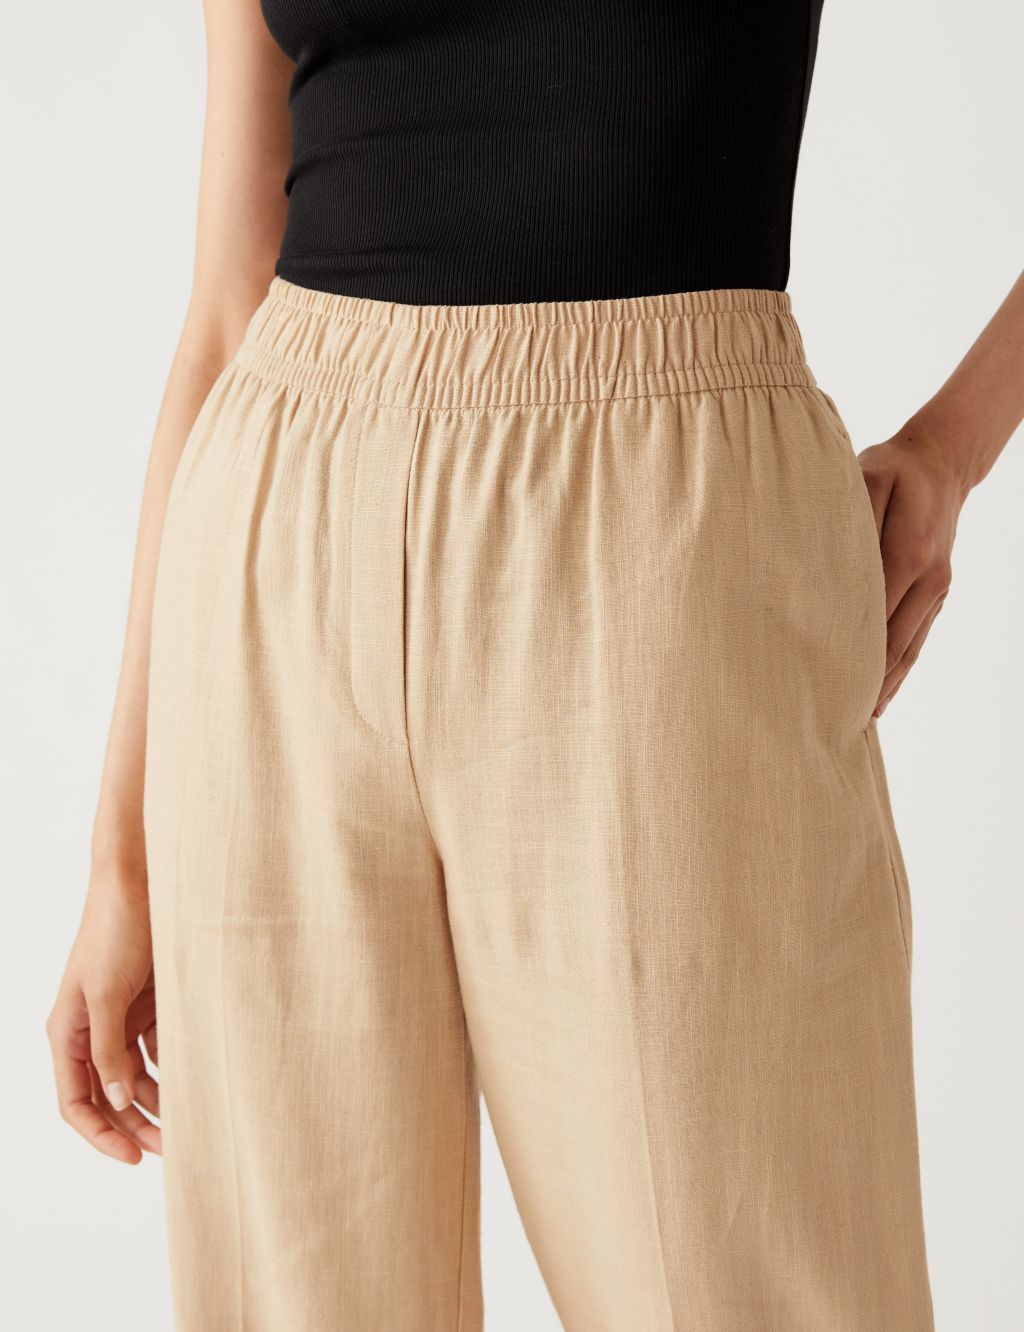 Linen Blend Relaxed Straight Trousers image 3